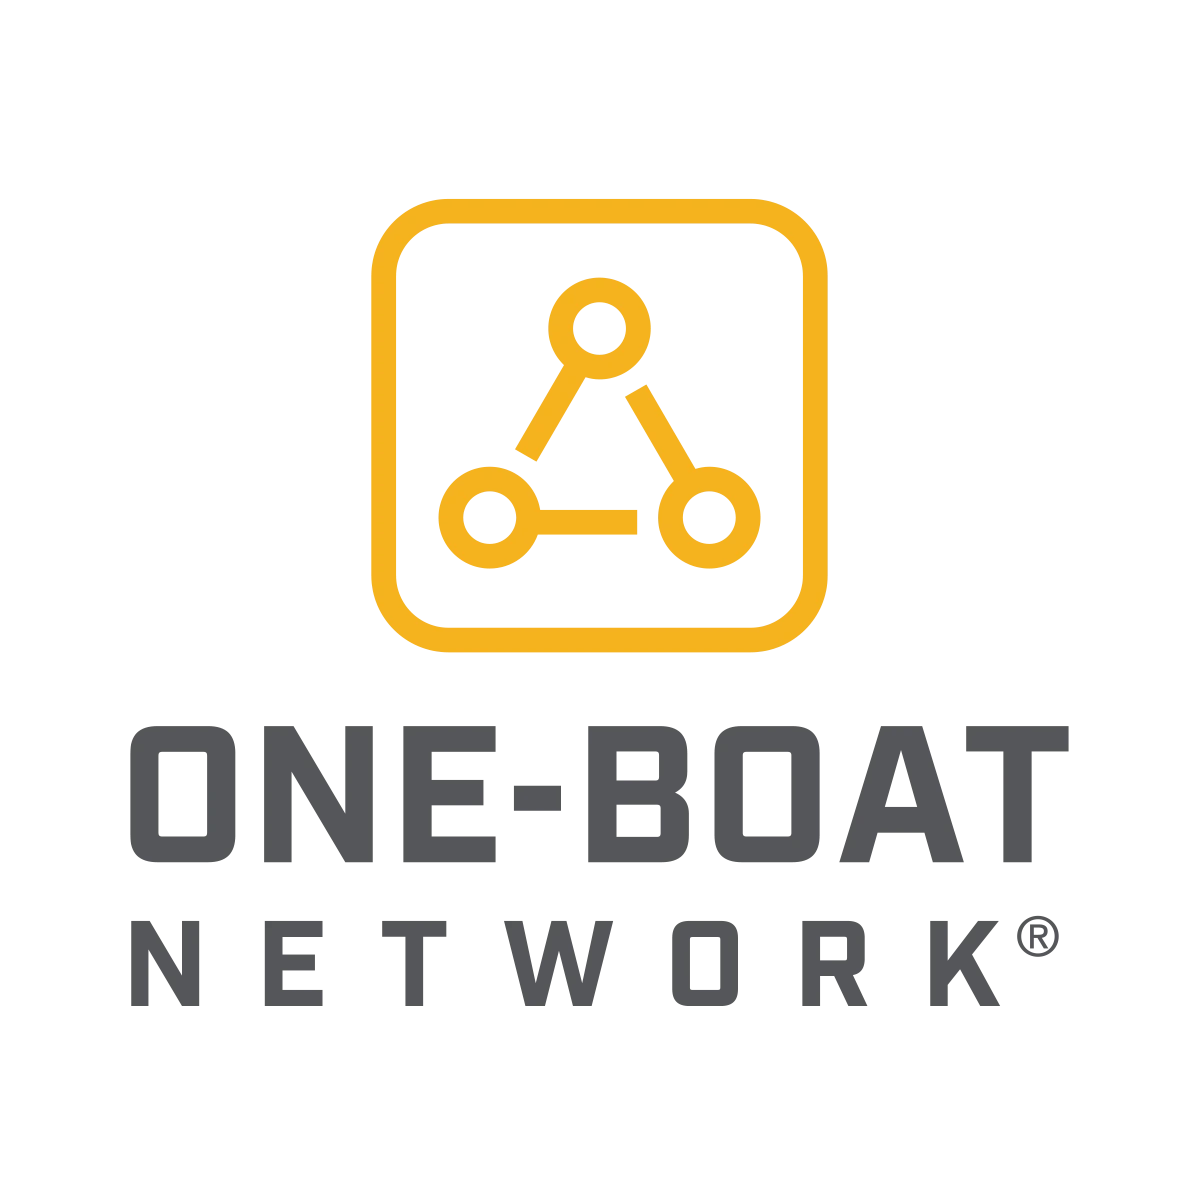 One-Boat Network